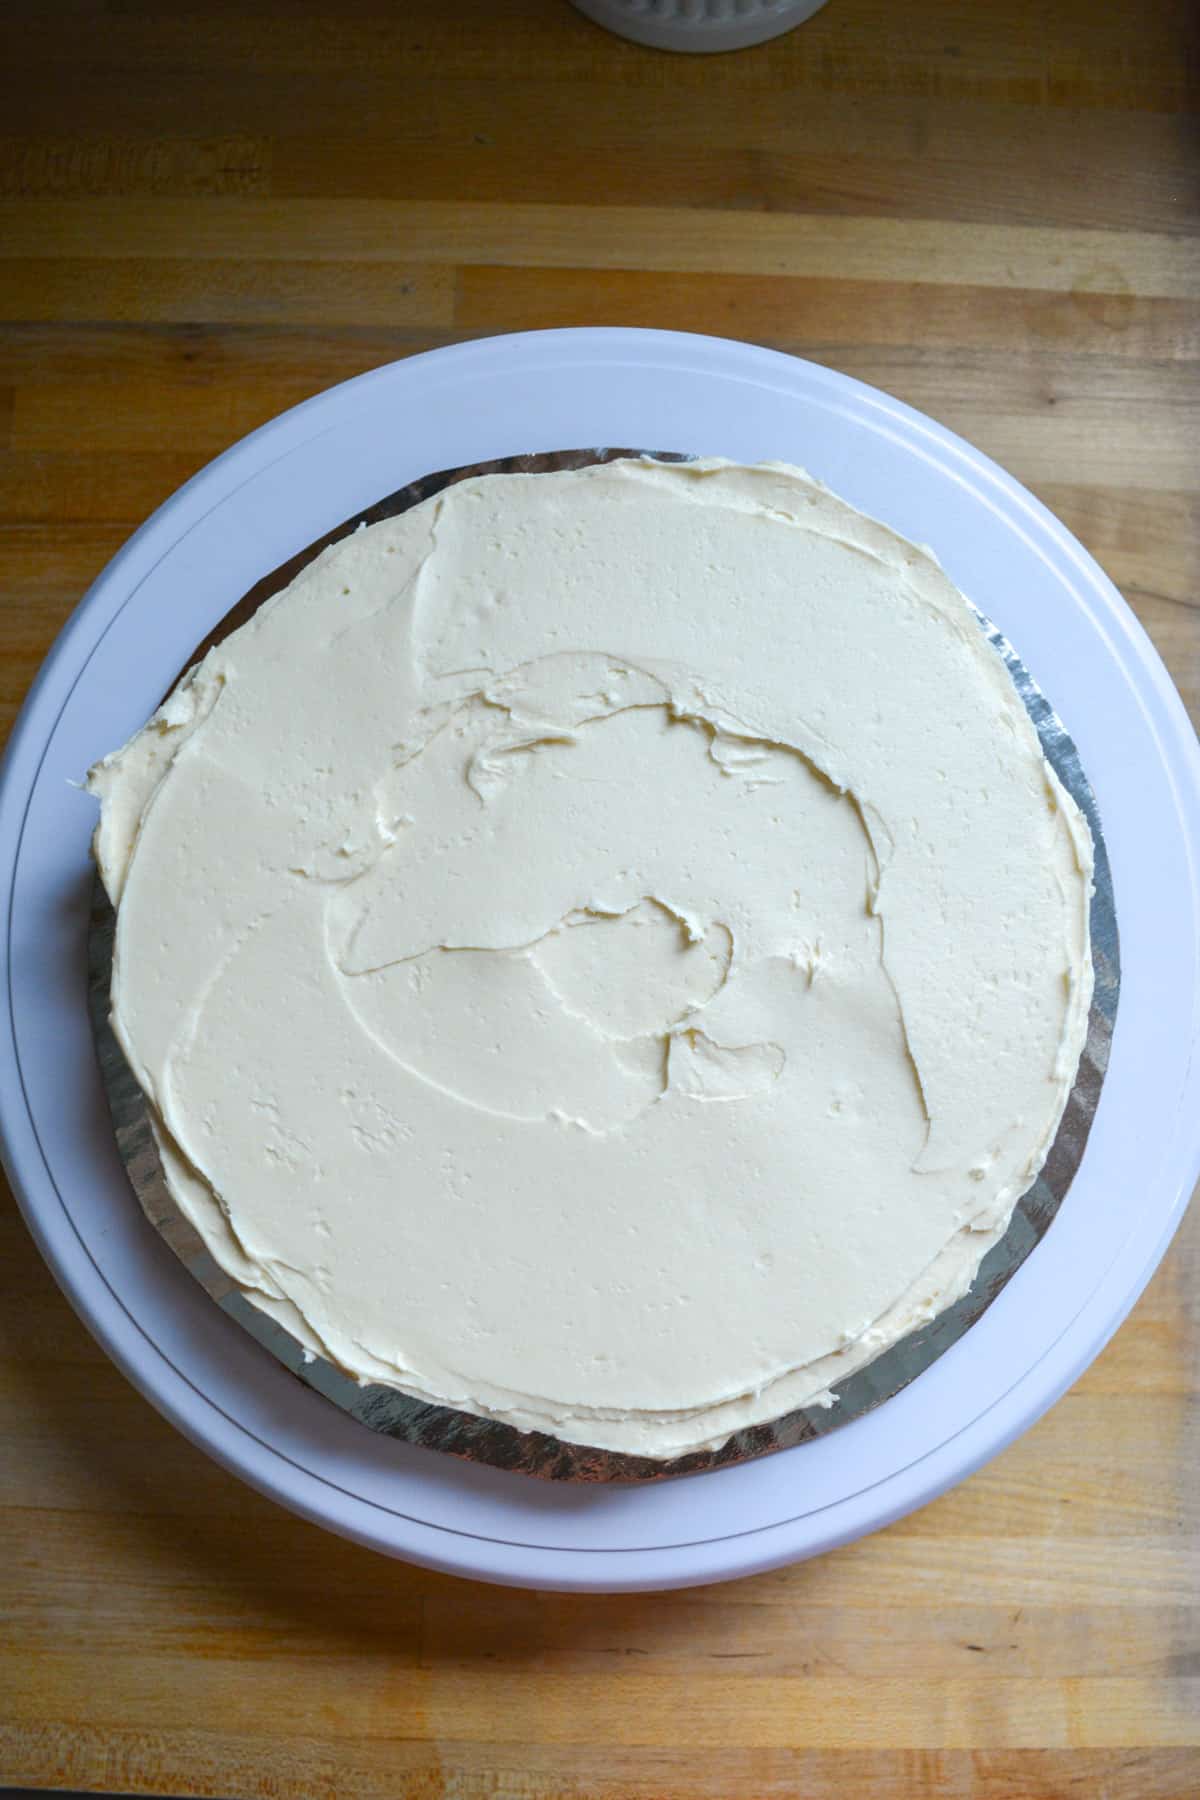 Frosting spread out across the cake layer on a cake board.